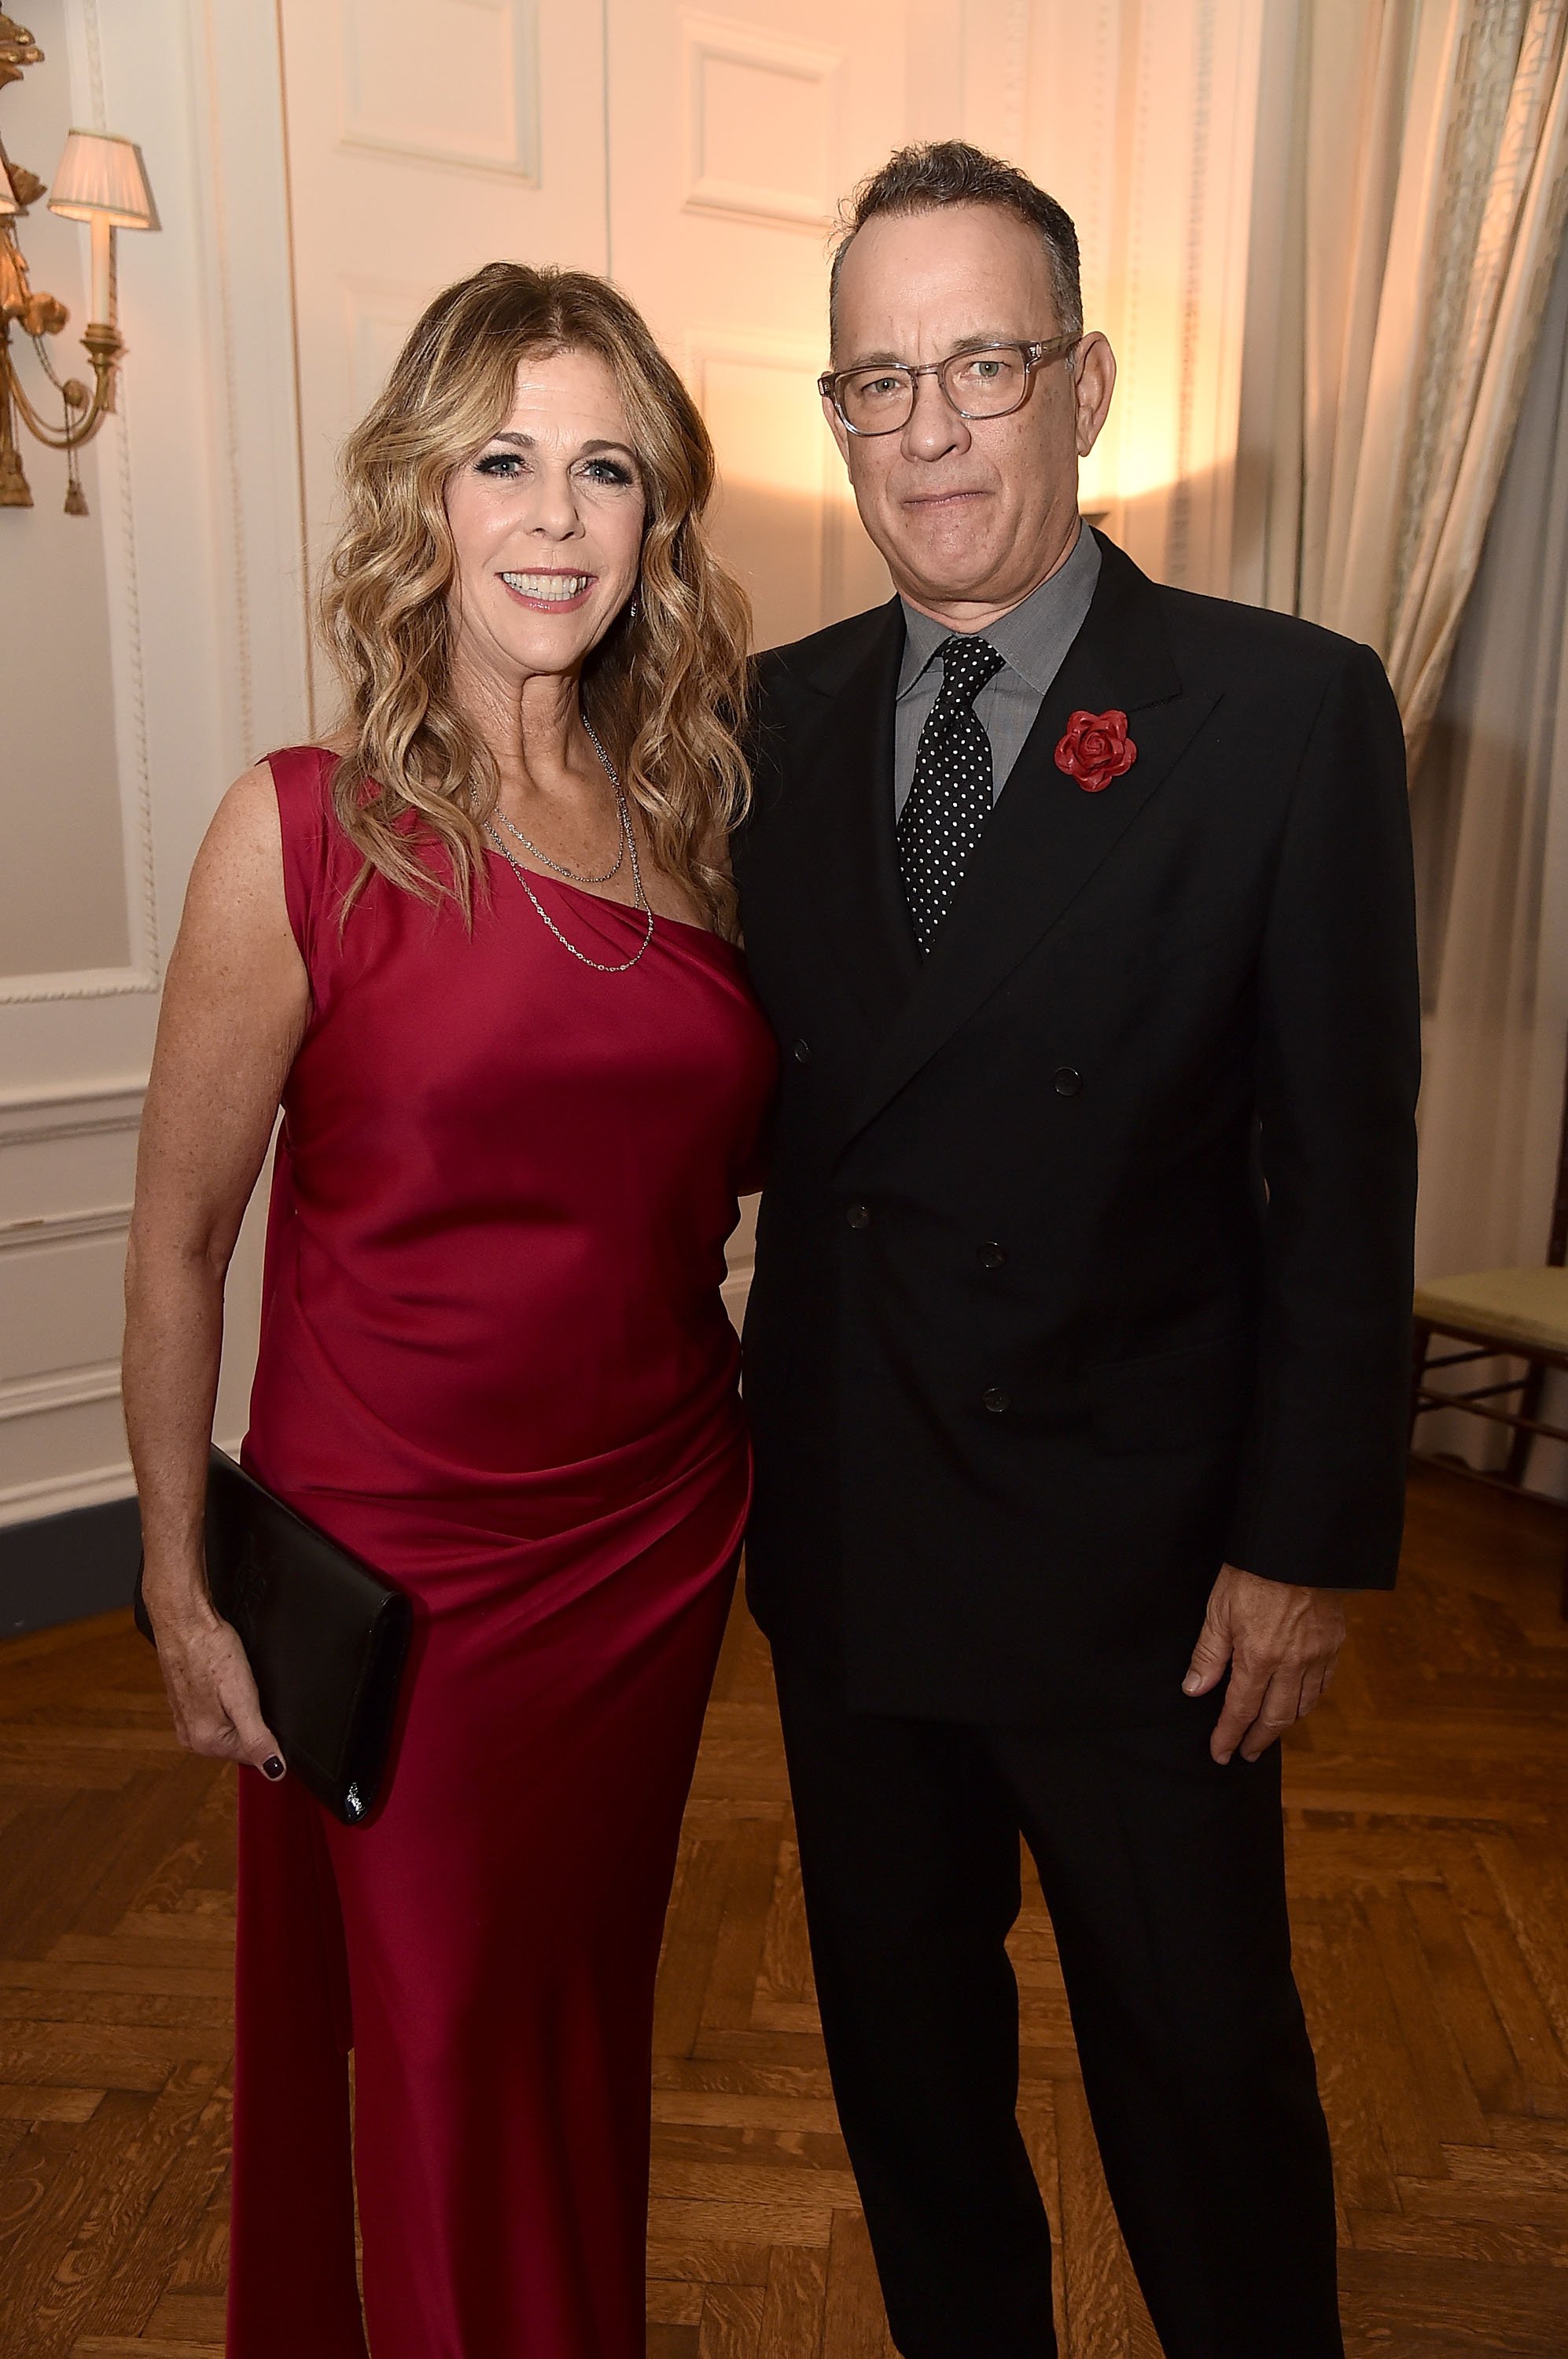 Rita Wilson and Tom Hanks attend the 2018 American Friends of Blerancourt Dinner at Colony Club on November 9, 2018 | Photo: GettyImages